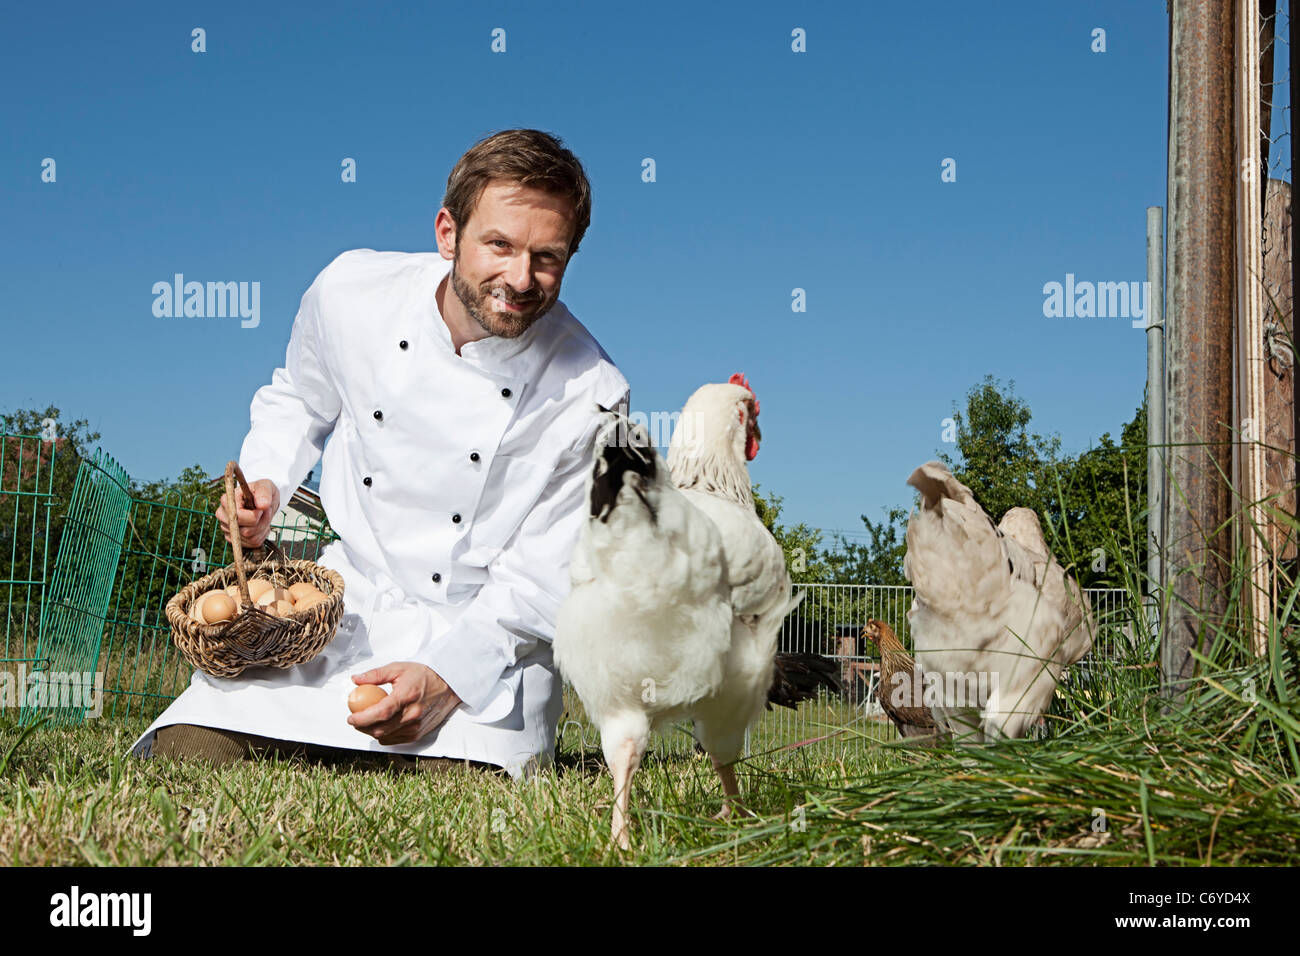 Chef feeding chickens outdoors Stock Photo